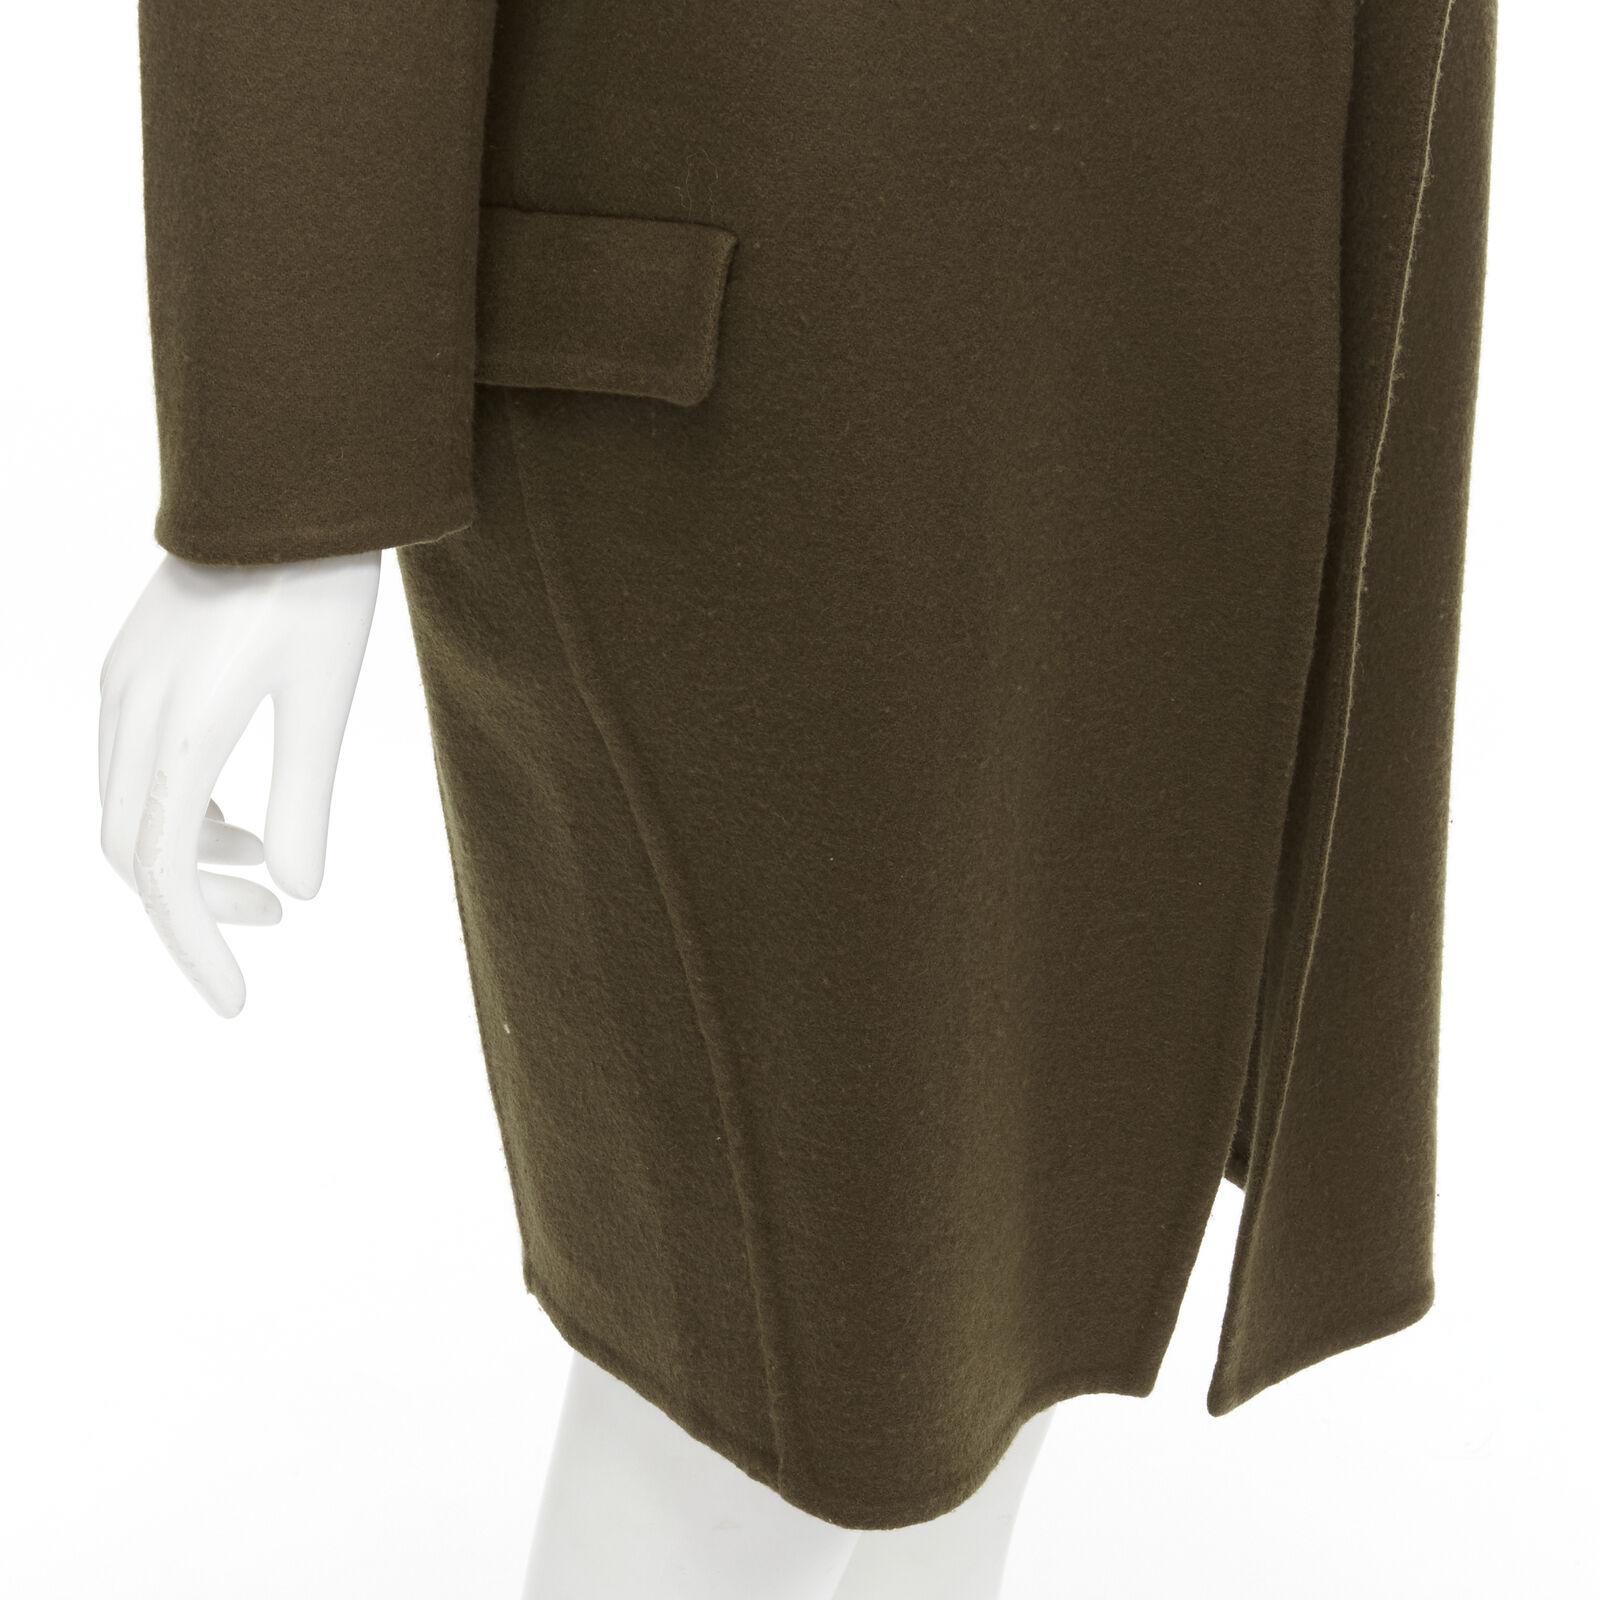 OLD CELINE Phoebe Philo 100% cashmere dark green unlined oversized coat FR34 XS
Reference: TGAS/C01522
Brand: Celine
Designer: Phoebe Philo
Material: 100% Cashmere
Color: Green
Pattern: Solid
Lining: Partially Lined
Extra Details: Military green